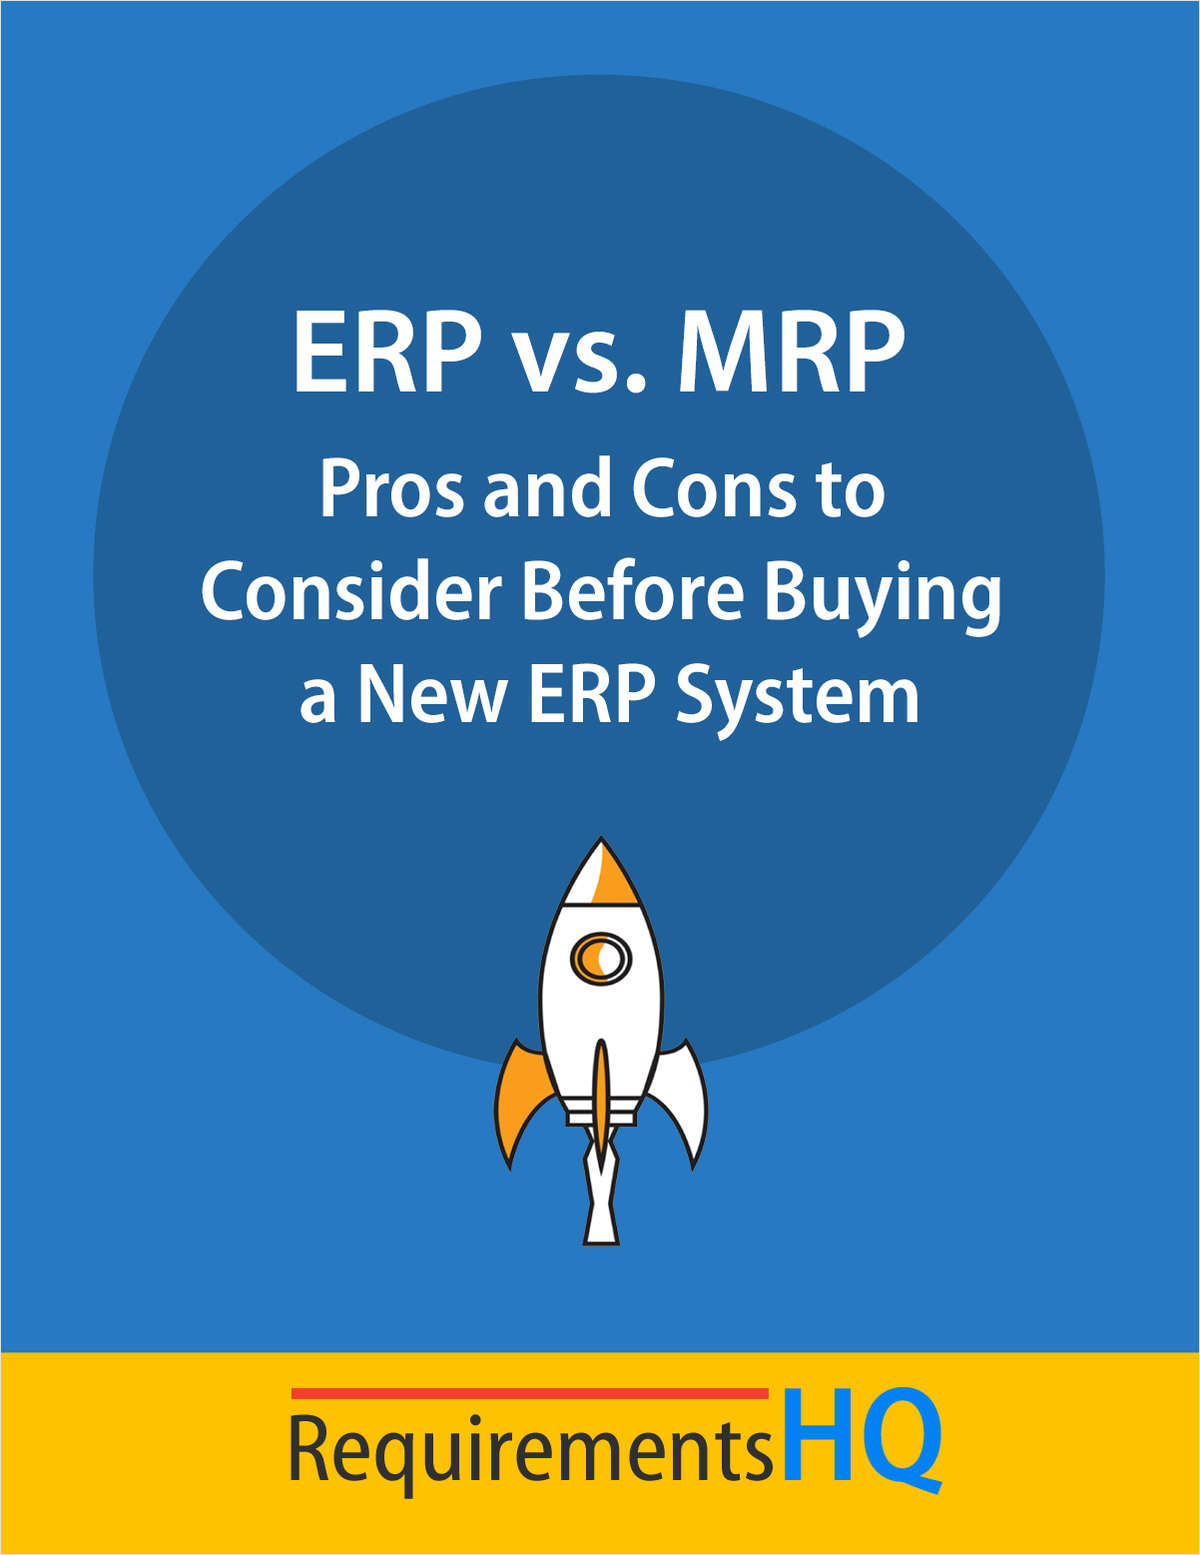 ERP vs. MRP: The Pros and Cons to Consider Before Buying a New ERP System